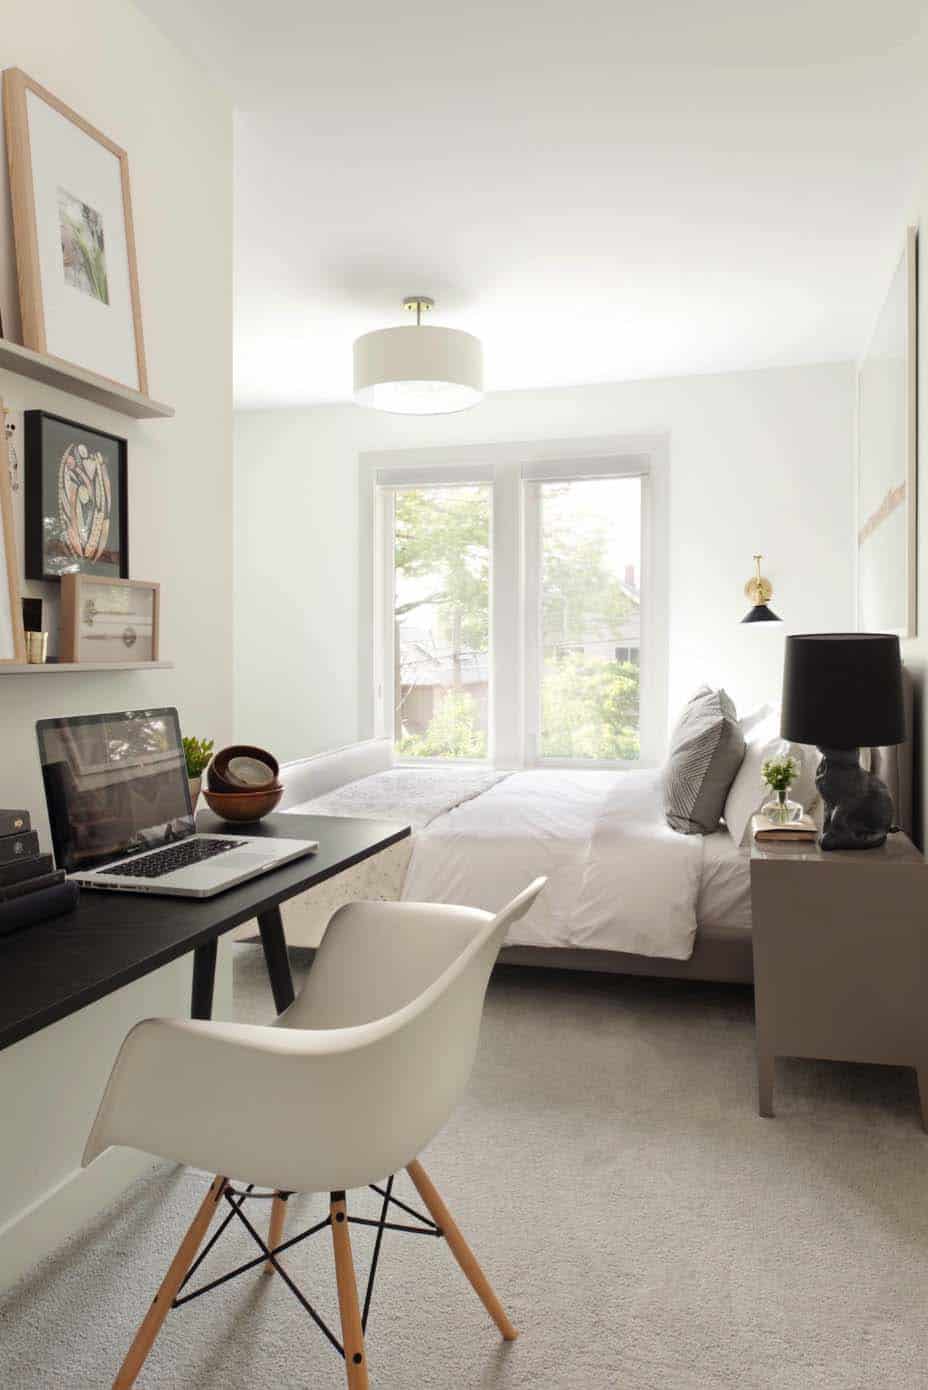 20 Fabulous ideas for a home office in the bedroom